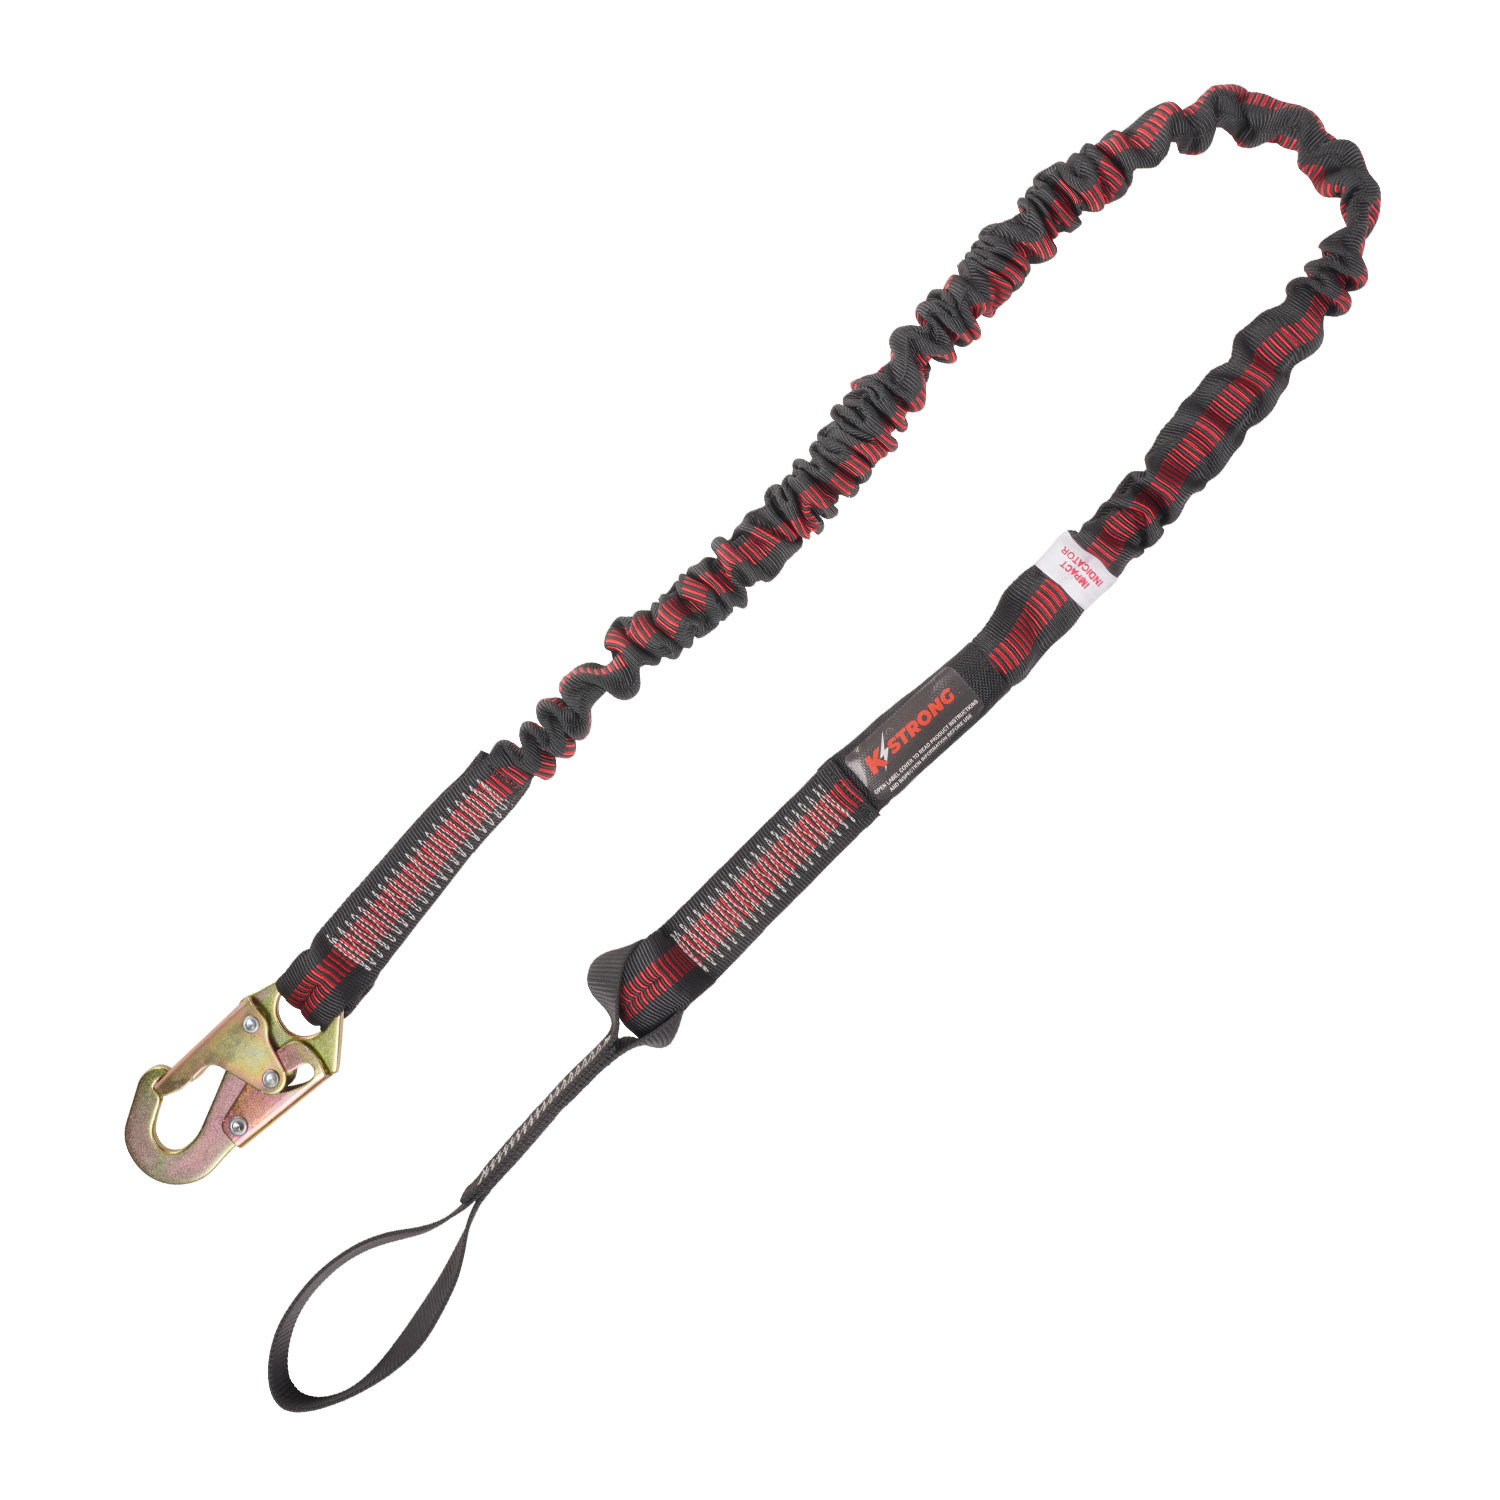 6' x 1.75 Lanyard with Snap Hook